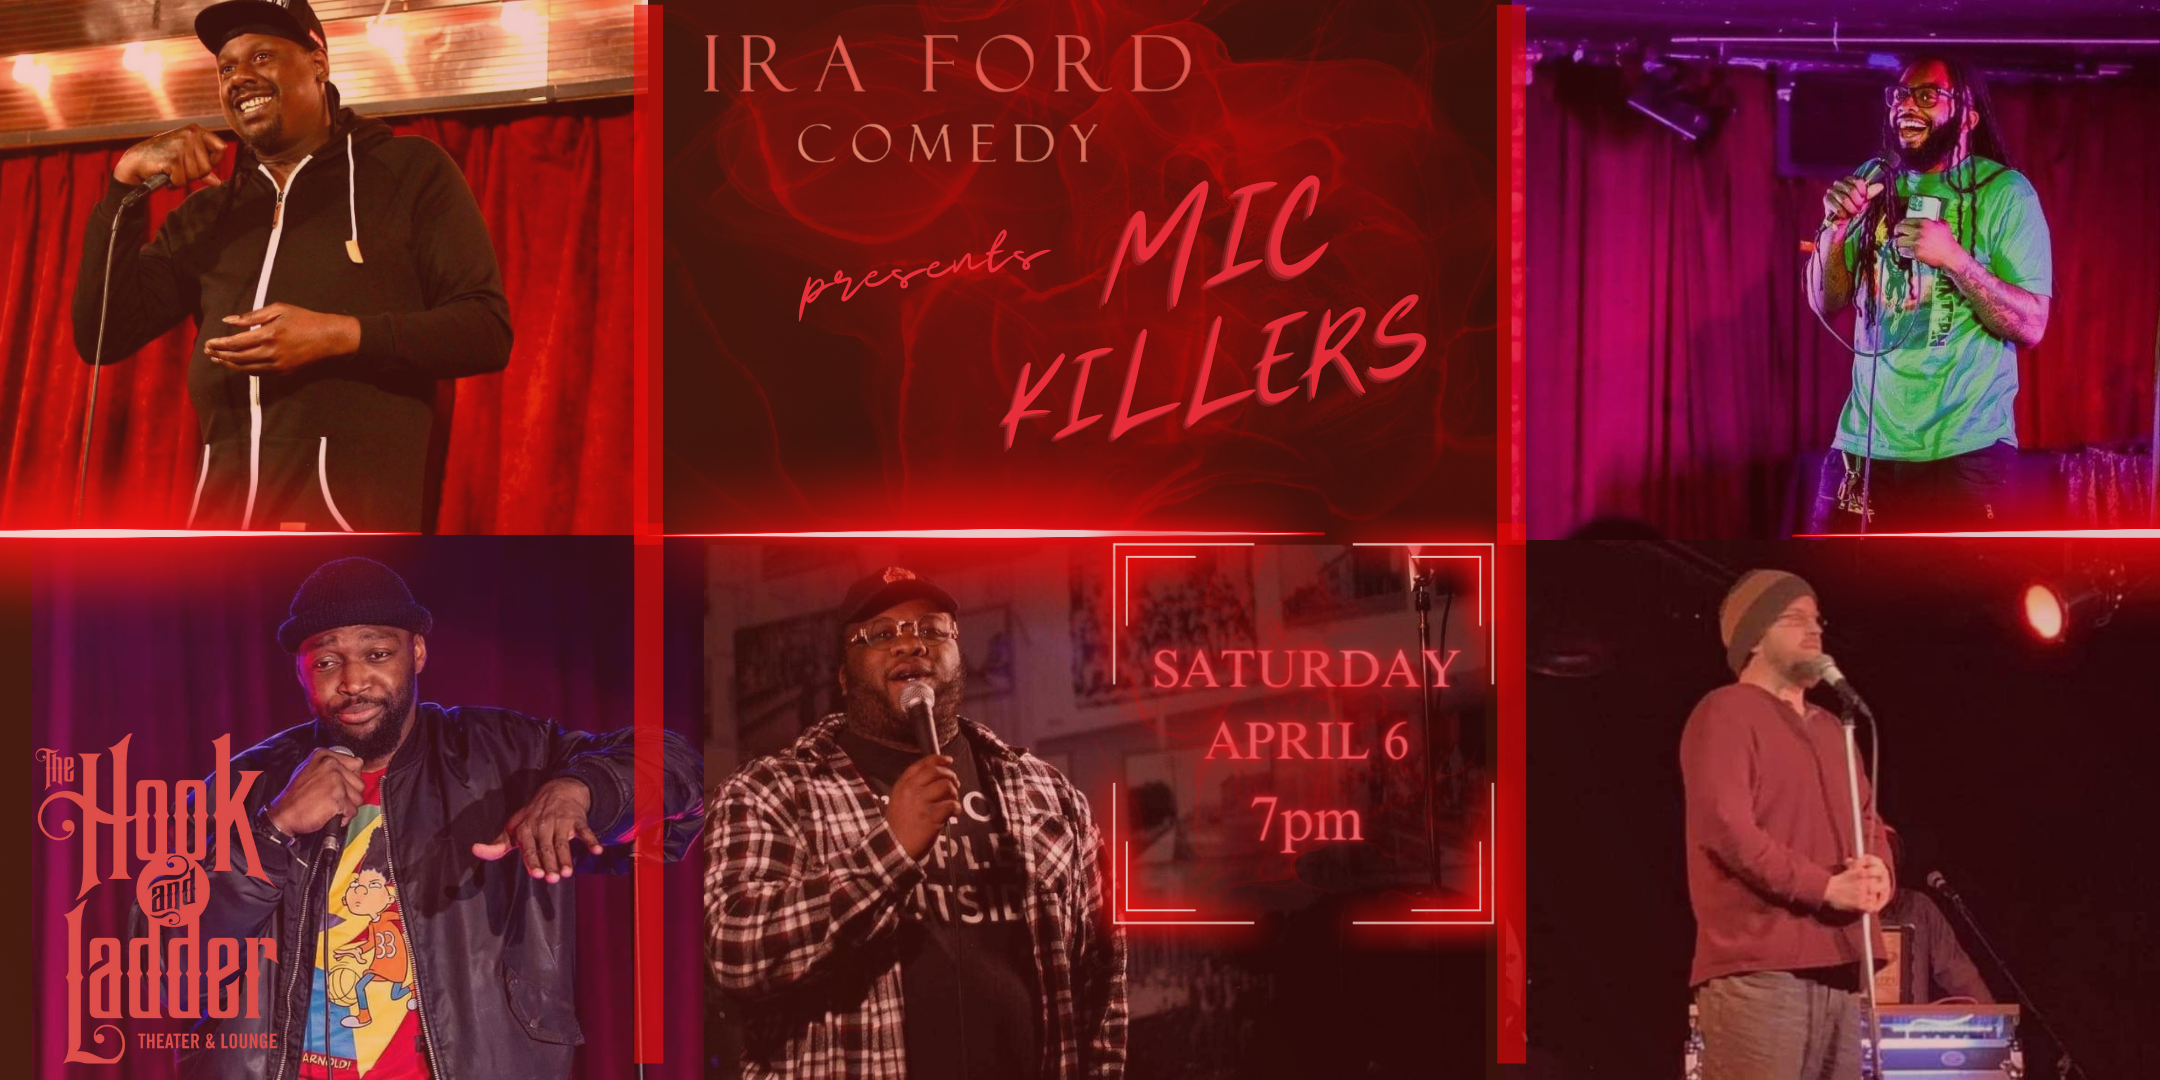 Ira Ford Comedy Presents Mic Killers + DJ Seven Swords Featuring Daryl Horner, Ell-Emaj Hill, Mahdi Gotti & John X with DJ Seven Swords Saturday, April 6 The Hook and Ladder Theater Doors 7:00pm :: Show 8:00pm :: 21+ GA: $15 ADV / $20 DOS *Seating Available On A First-come First-served Basis